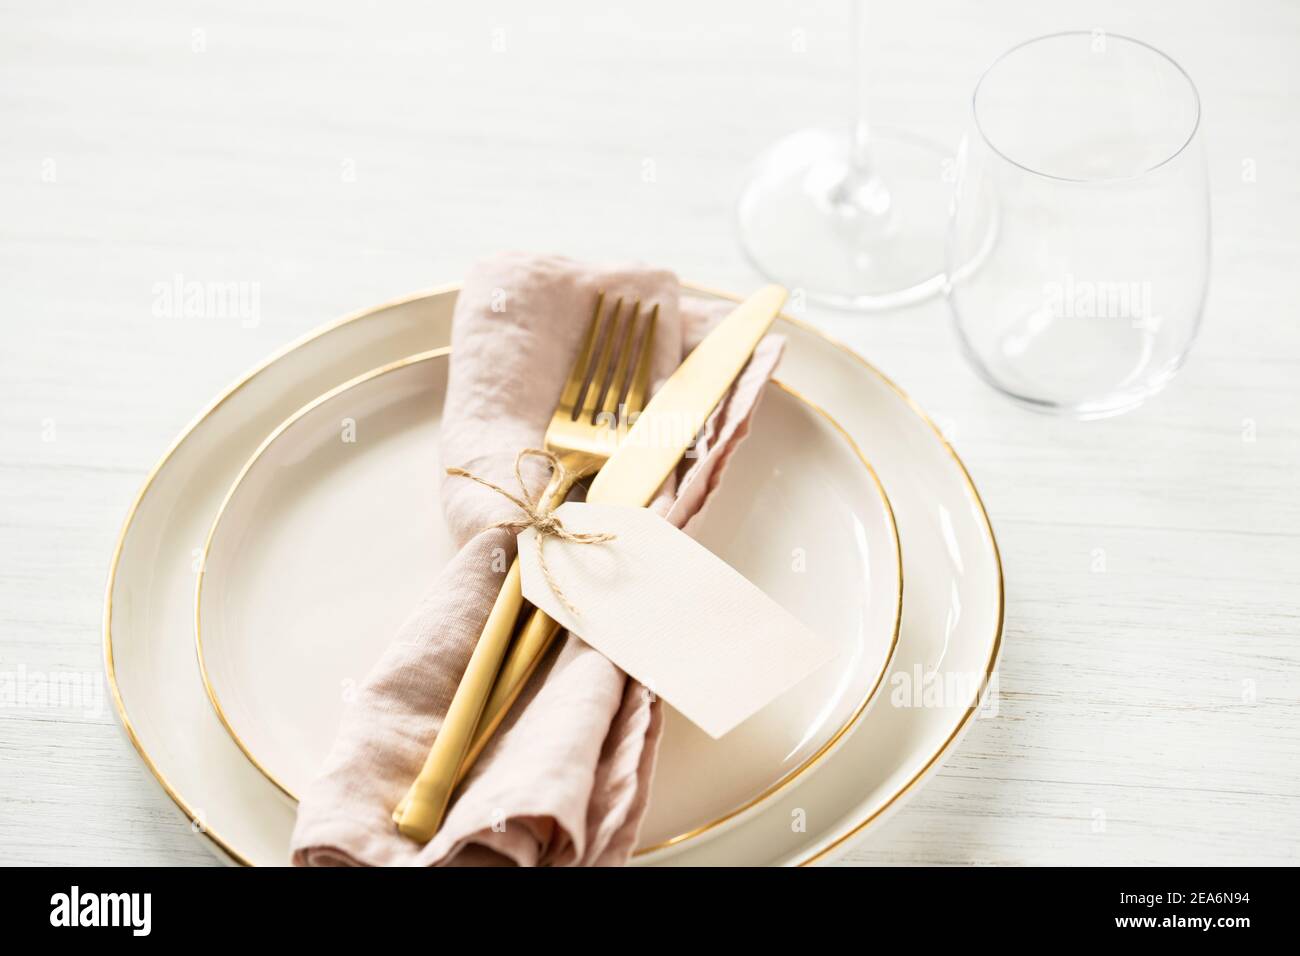 Golden rim plates and golden cutlery tied with tag on white table. Angle view on table setting. Stock Photo